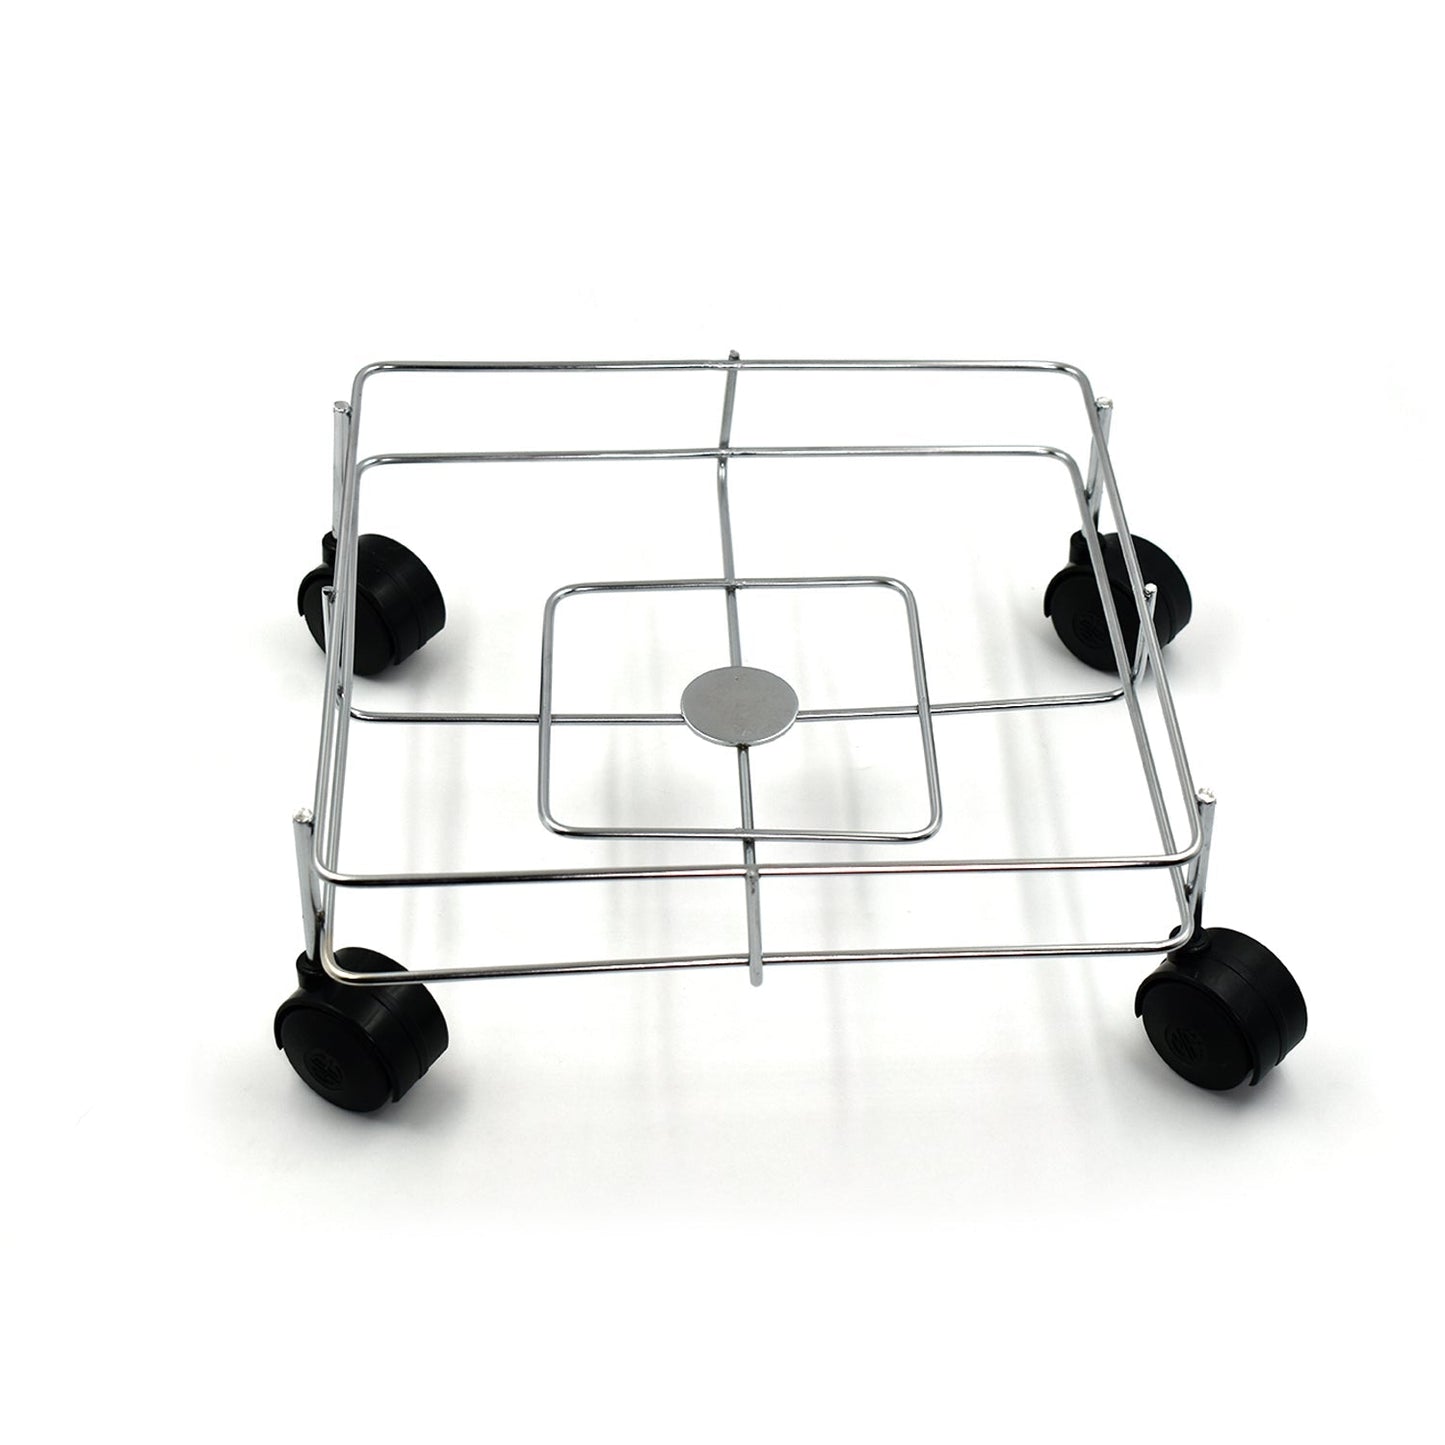 2787 Ss Square Oil Stand For Carrying Oil Bottles And Jars Easily Without Any Problem. DeoDap